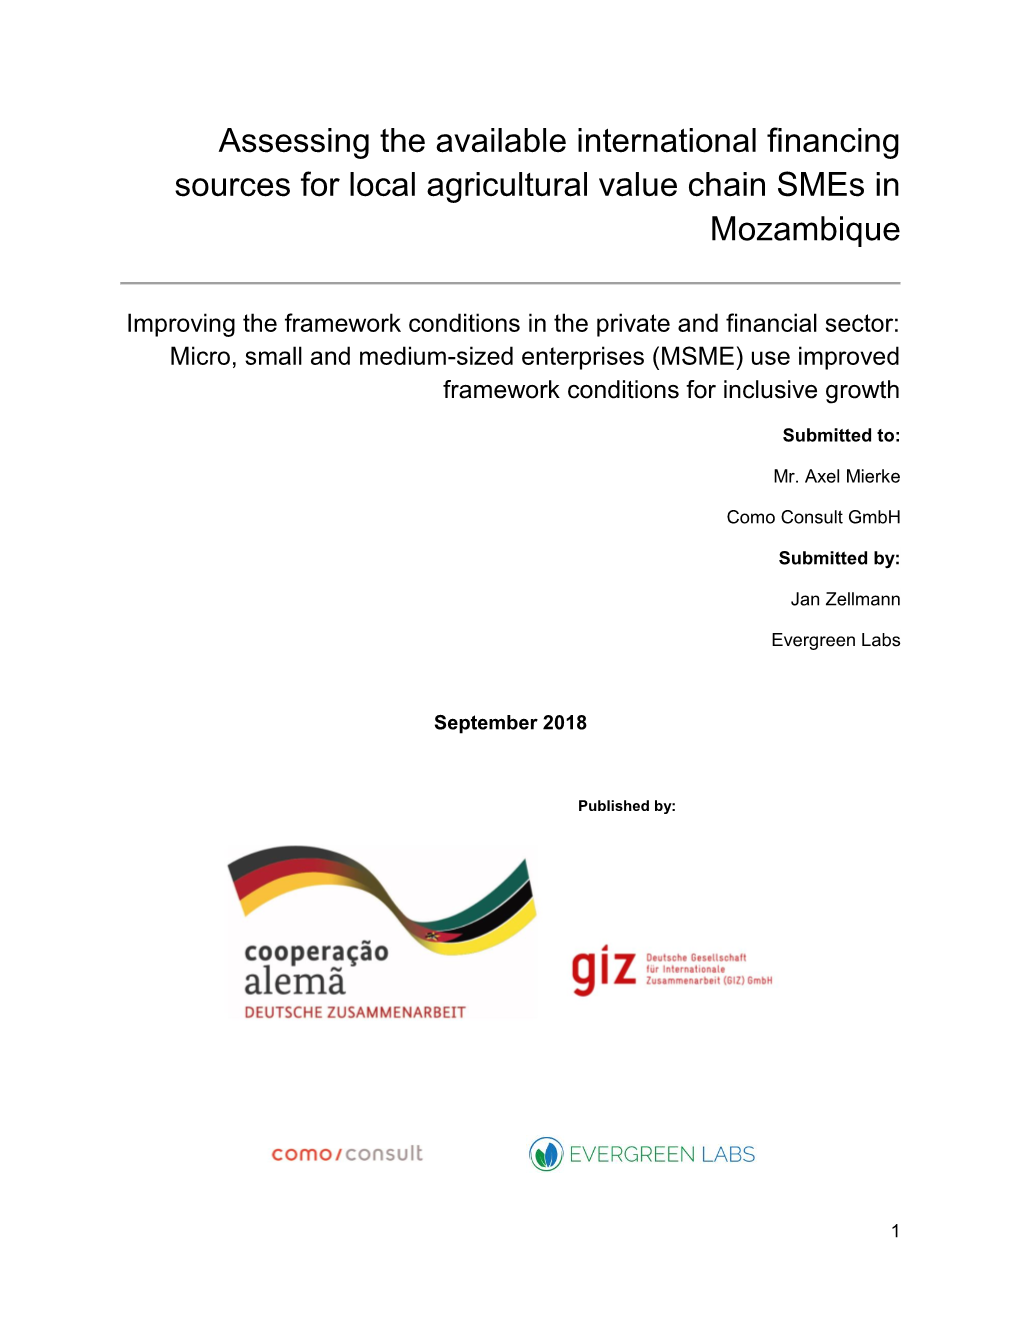 Assessing the Available International Financing Sources for Local Agricultural Value Chain Smes in Mozambique